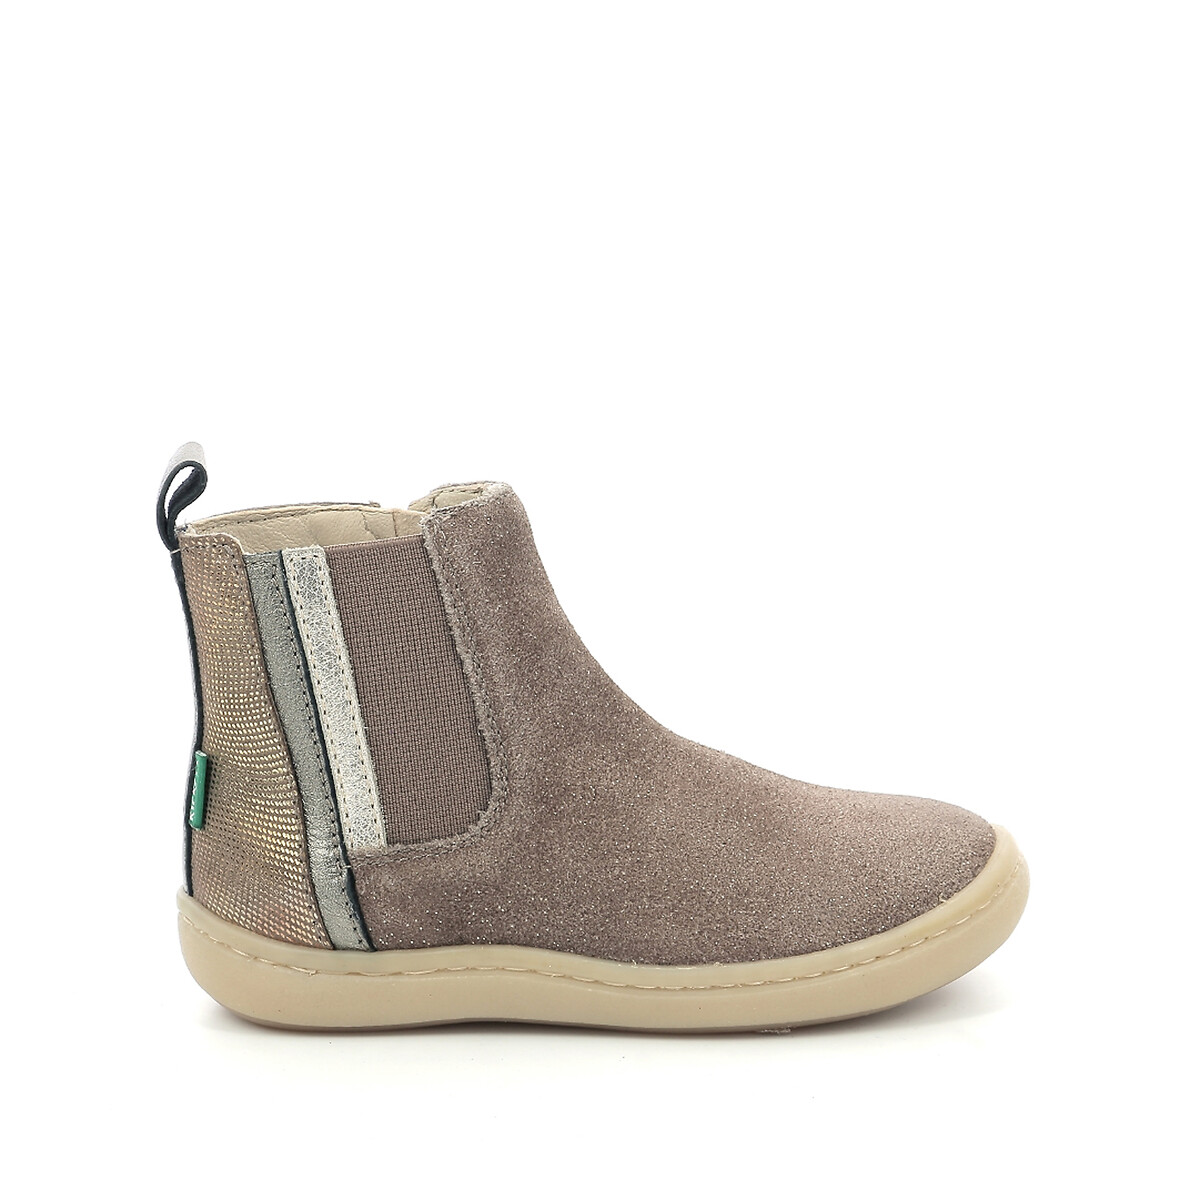 Kids Kickpolina Ankle Boots in Leather